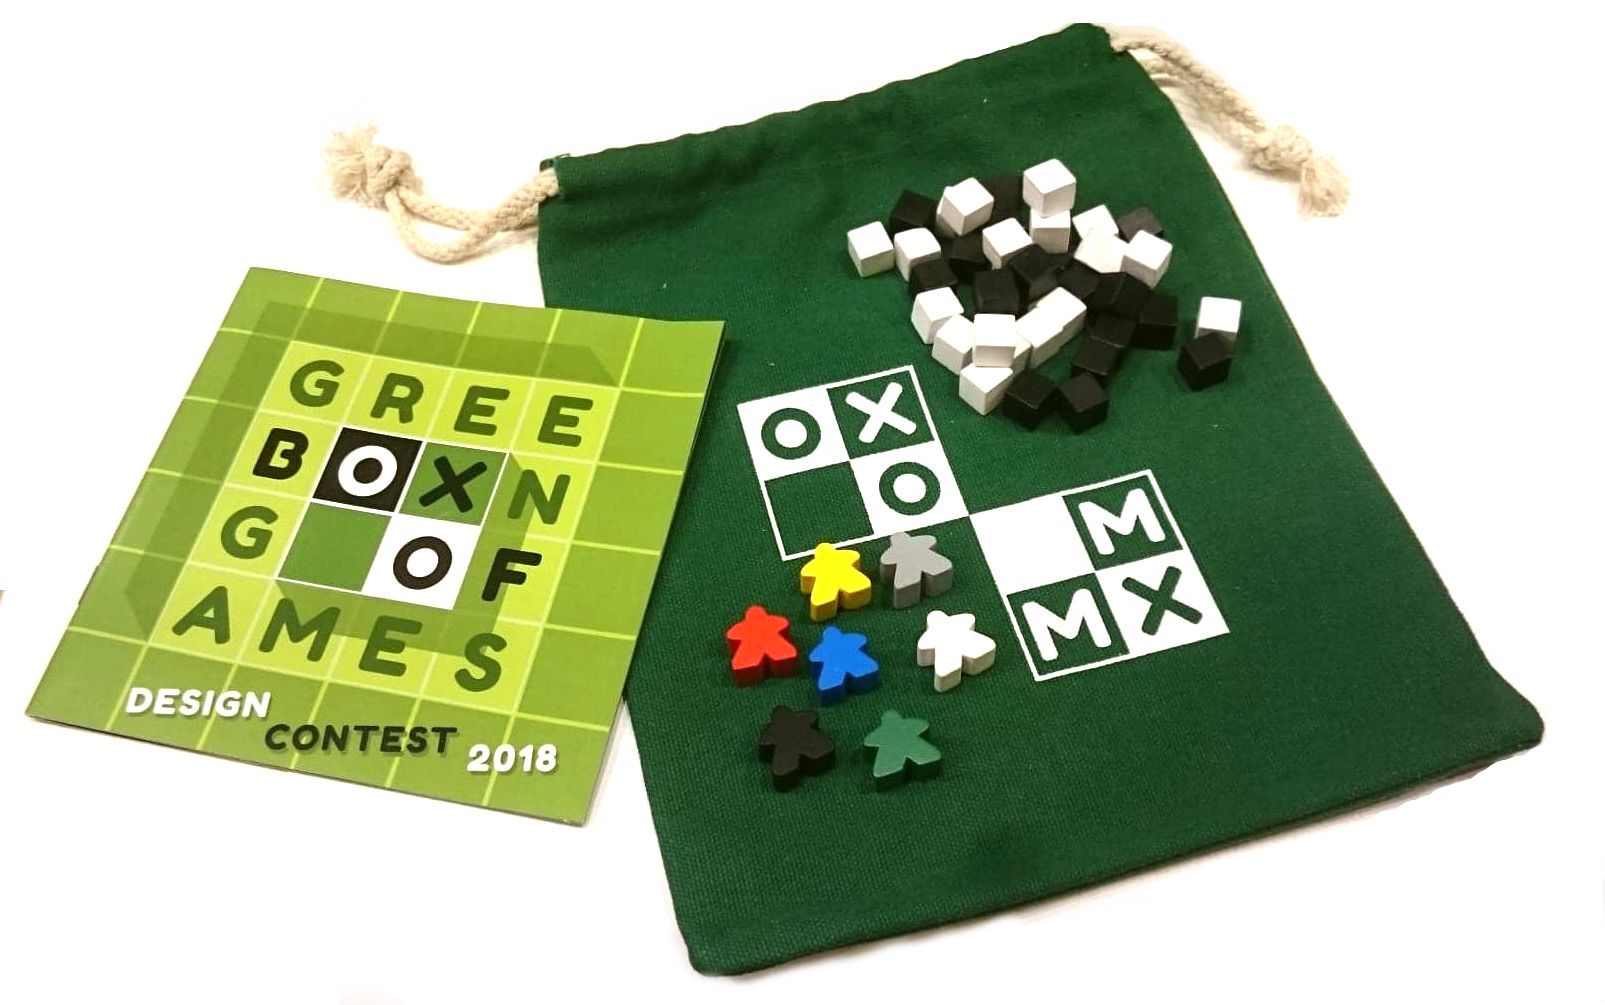 Green Box of Games: The Meeple Mini Expansion